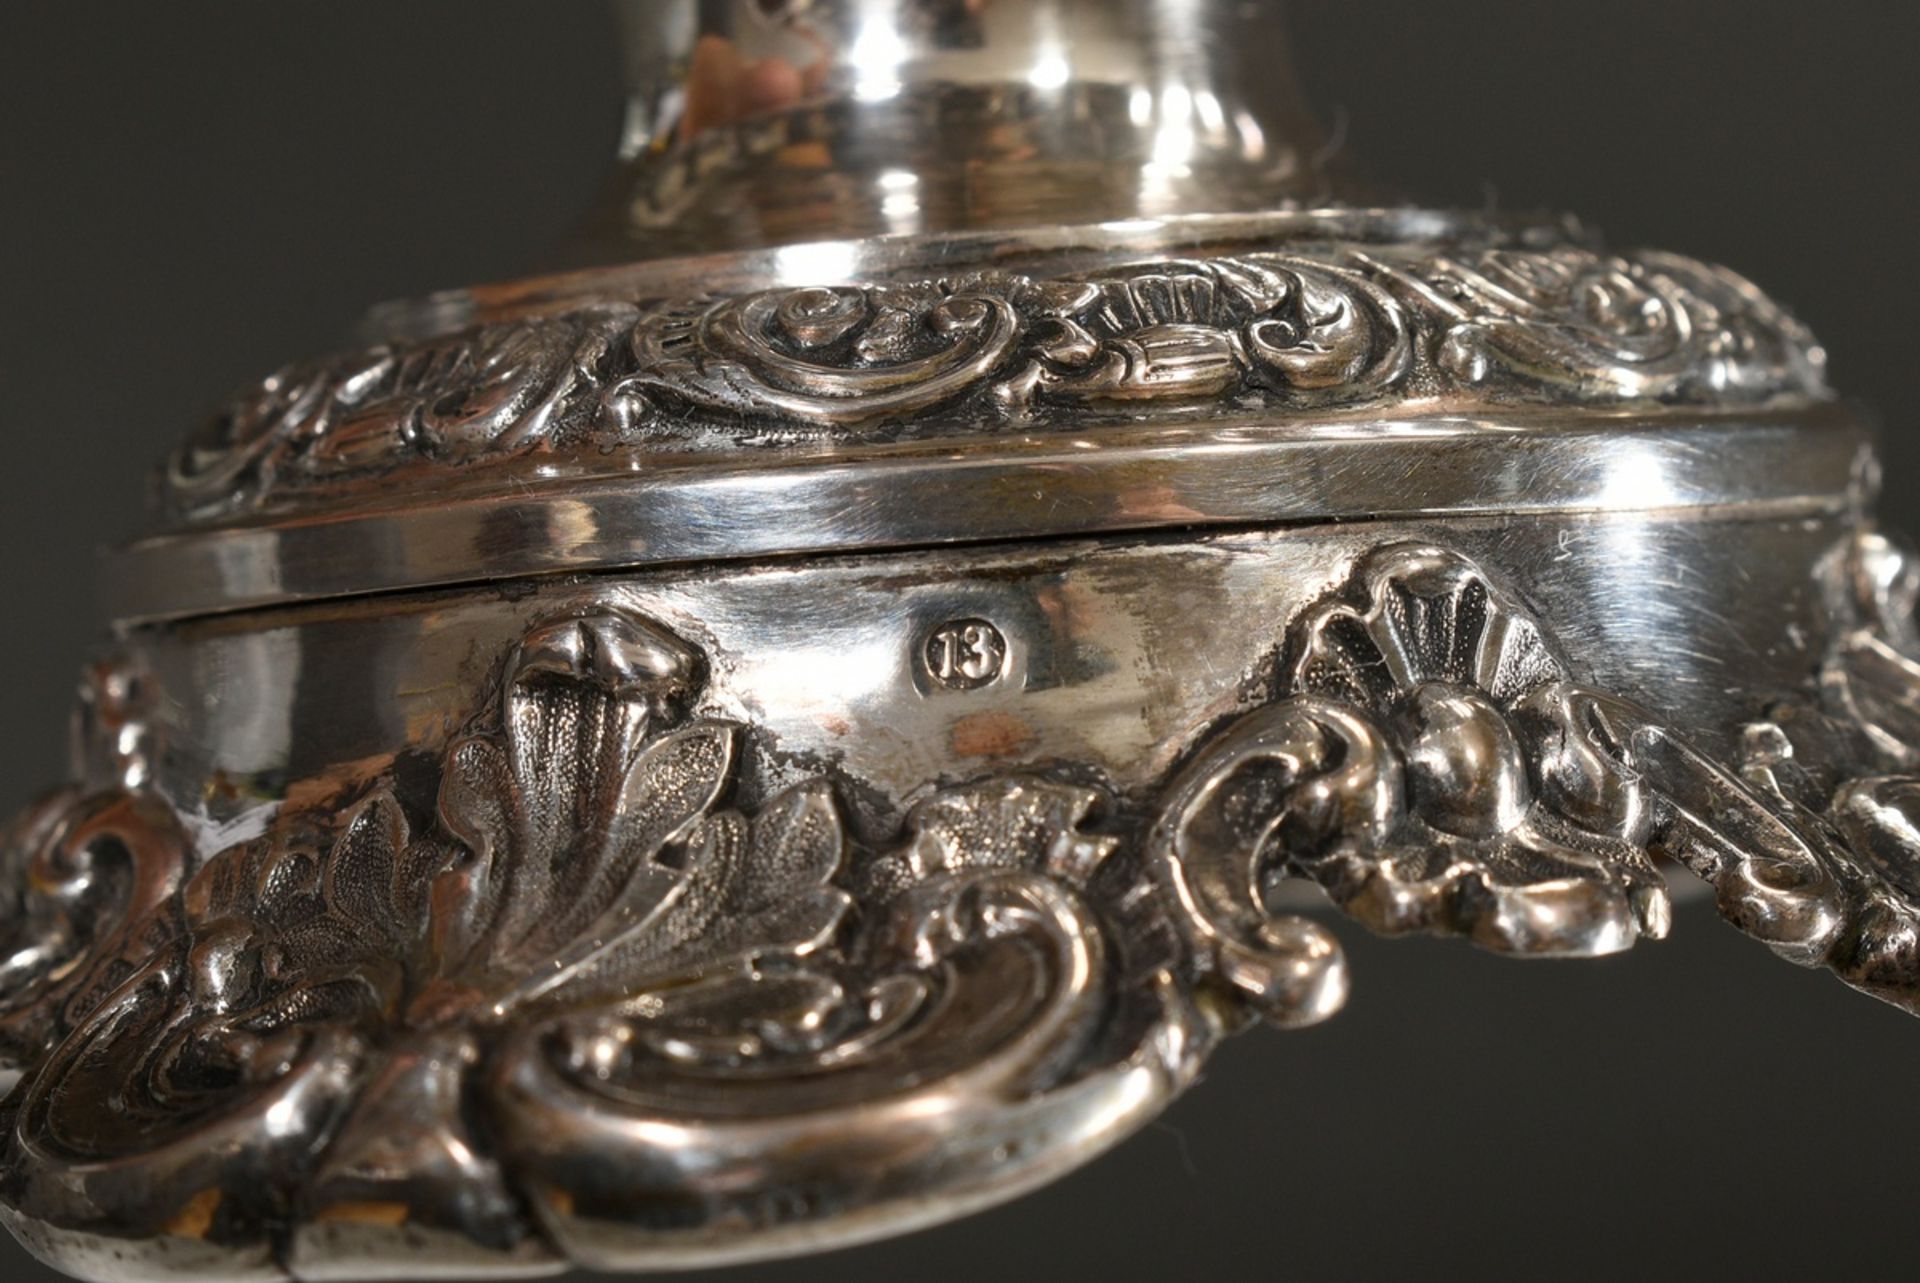 Biedermeier sugar centerpiece in crater shape with floral relief on foot, rim and handles, silver 1 - Image 4 of 4